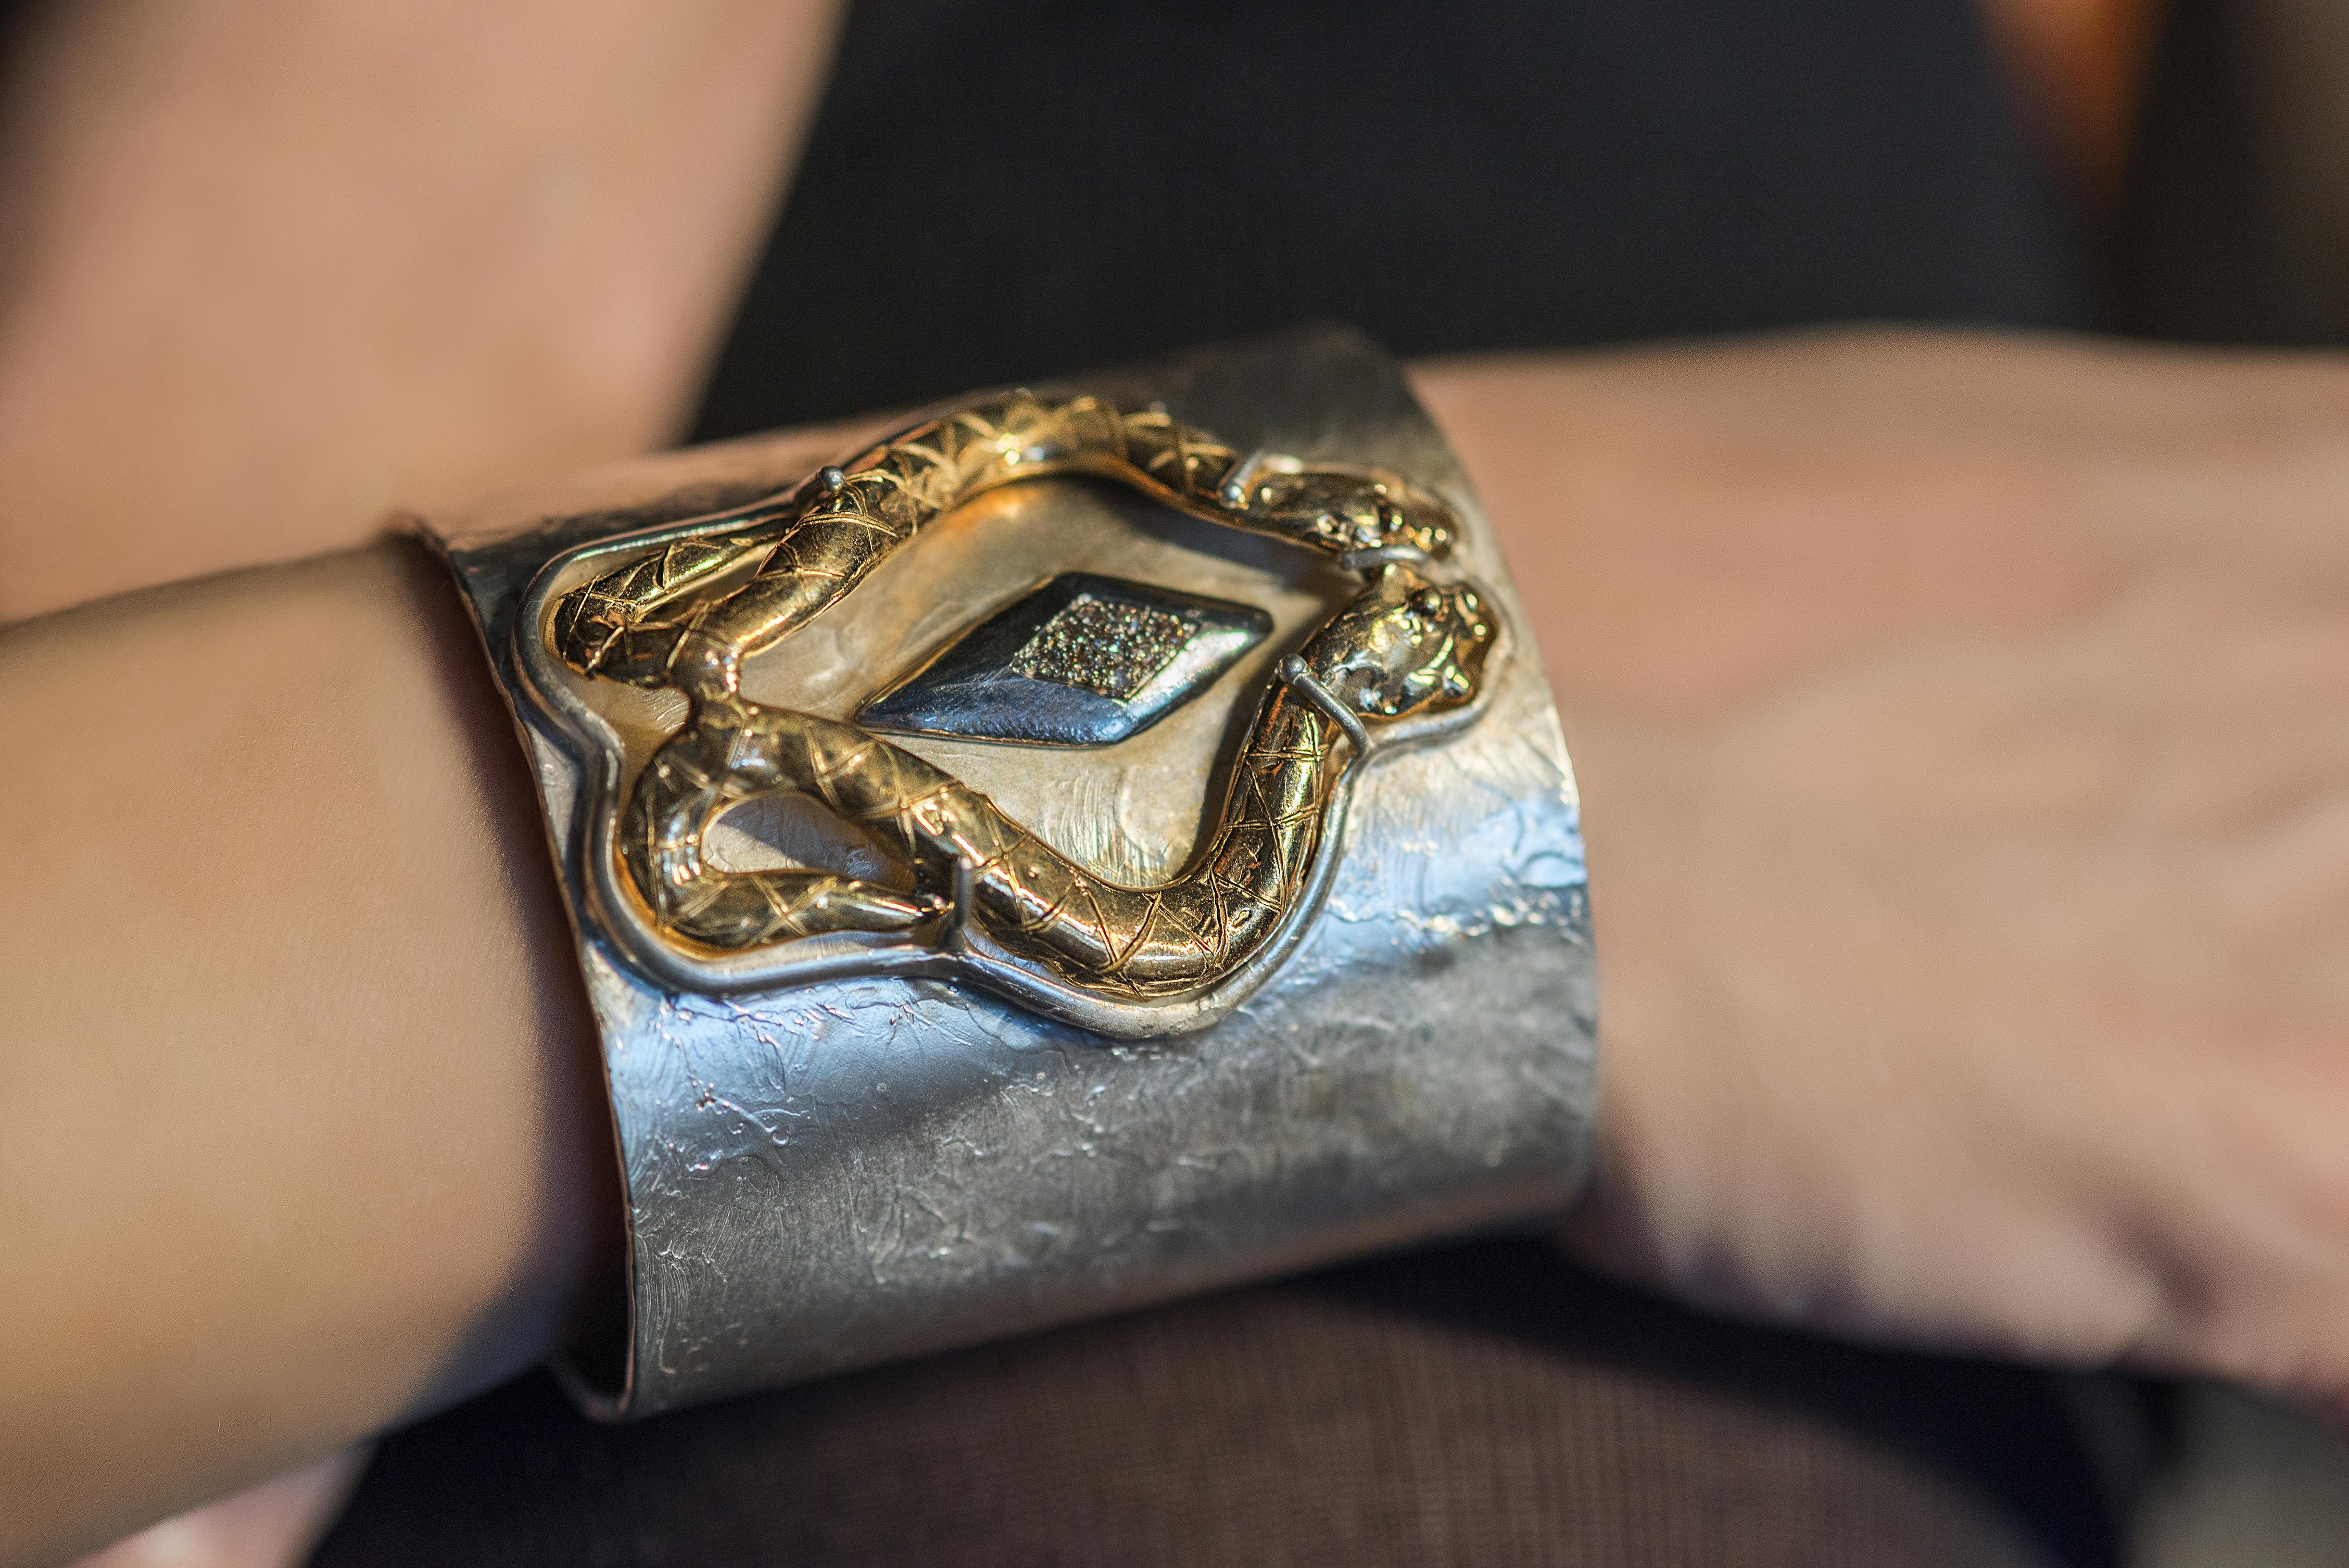 Rossella Ugolini Design Collection  a Fierce Sensual Cuff Snakes Bracelet Handcrafted in 24 Karat Gold Plated Silver Sterling and 0.20 Karat Brown Diamonds.
On the Modern Silver Sterling bracelet two 24 Karats gold plated bronzed snakes meet and by